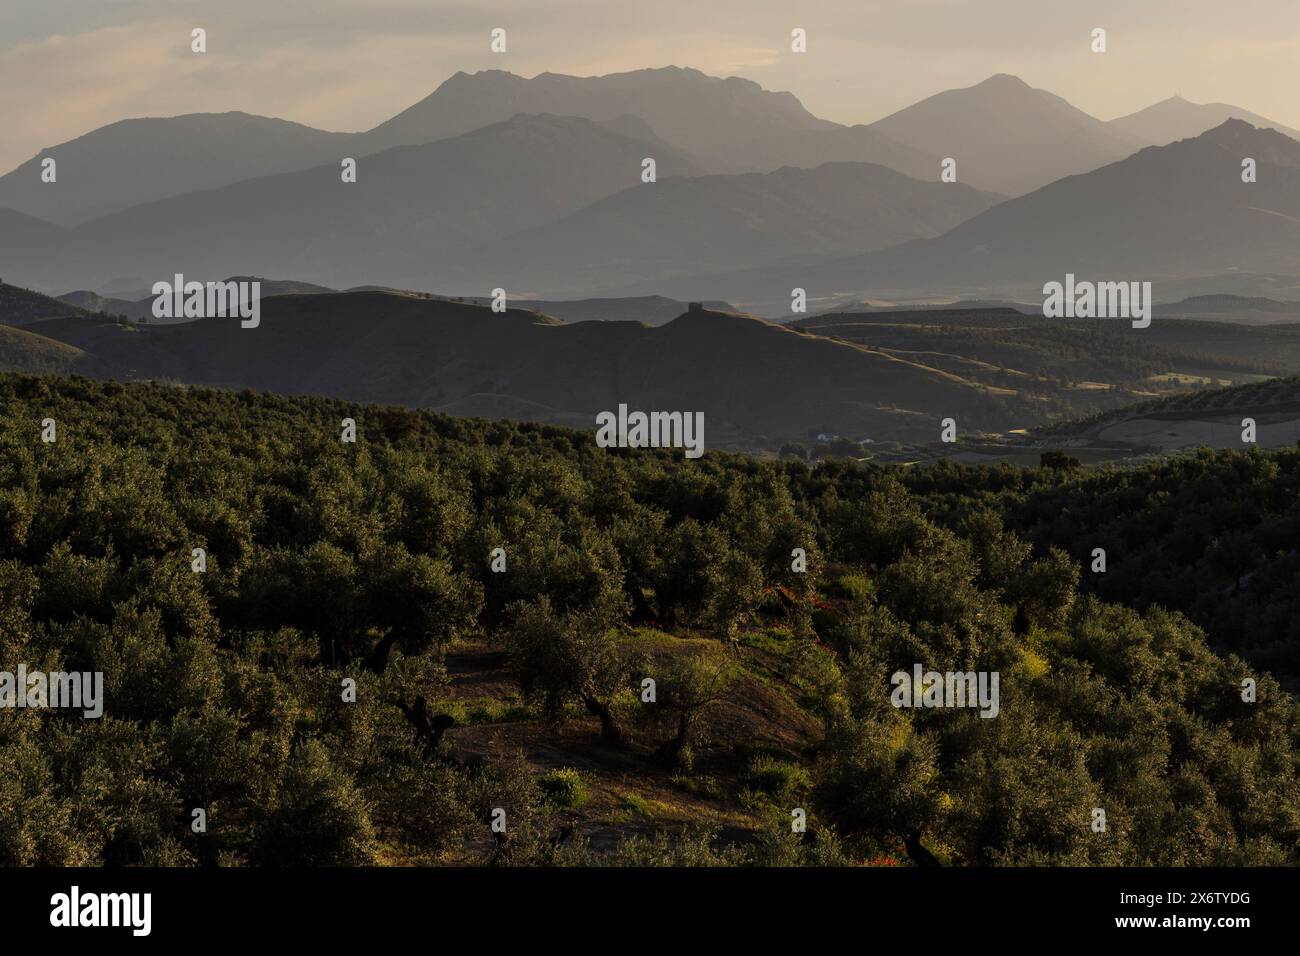 silhouette of the Sierra Nevada National Park from Toya castle, Jaén province, Andalusia, Spain. Stock Photo